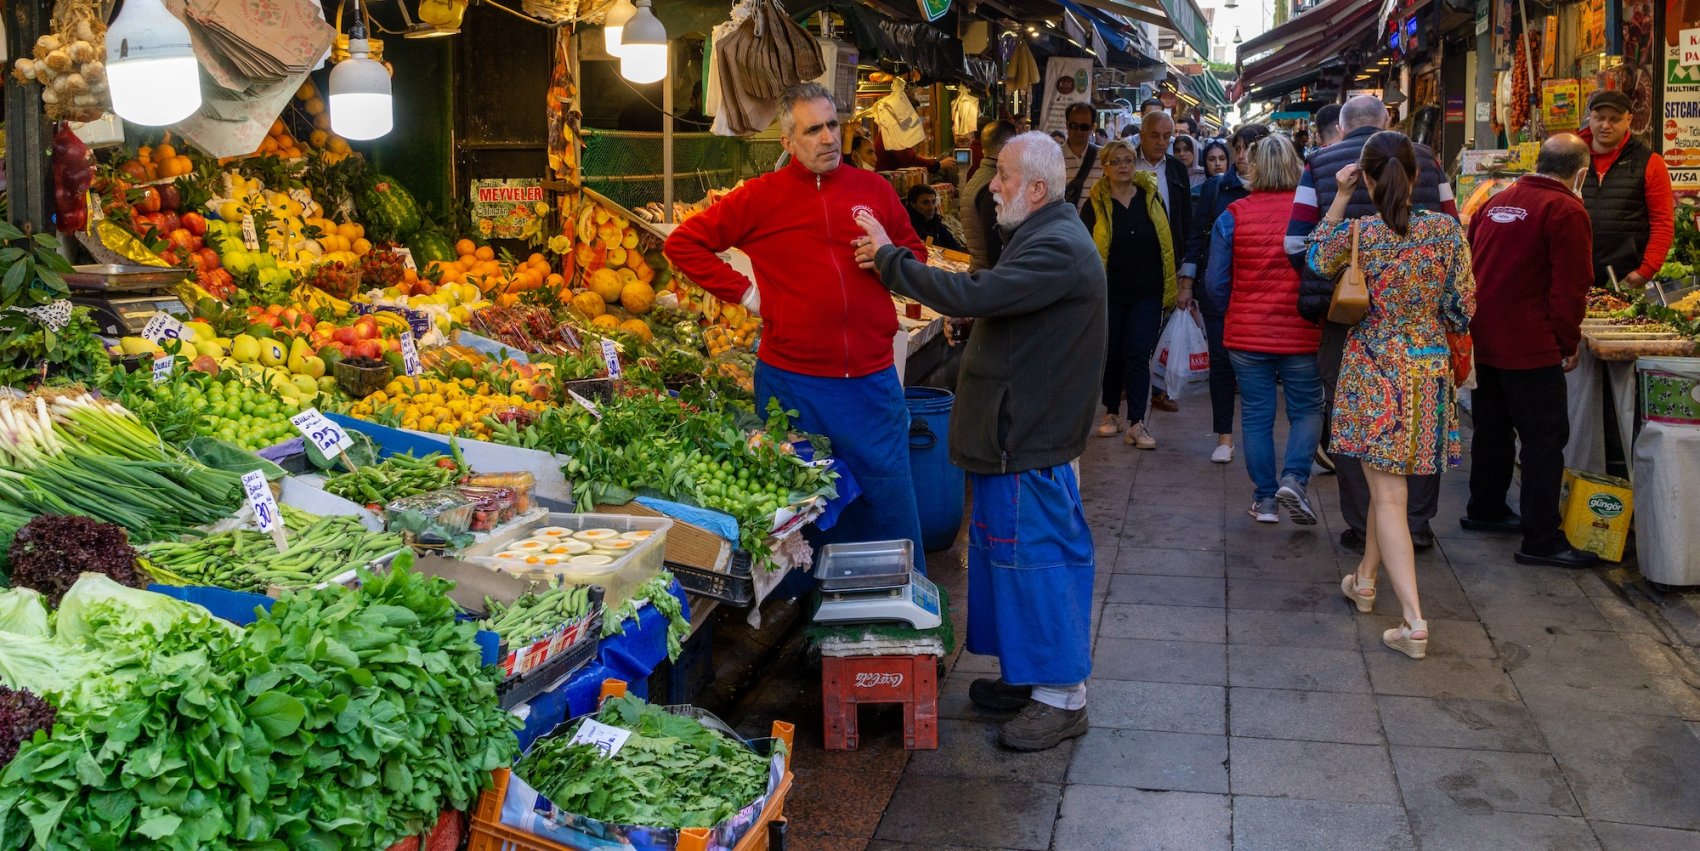 Two men talking to each other at a farmers market abroad